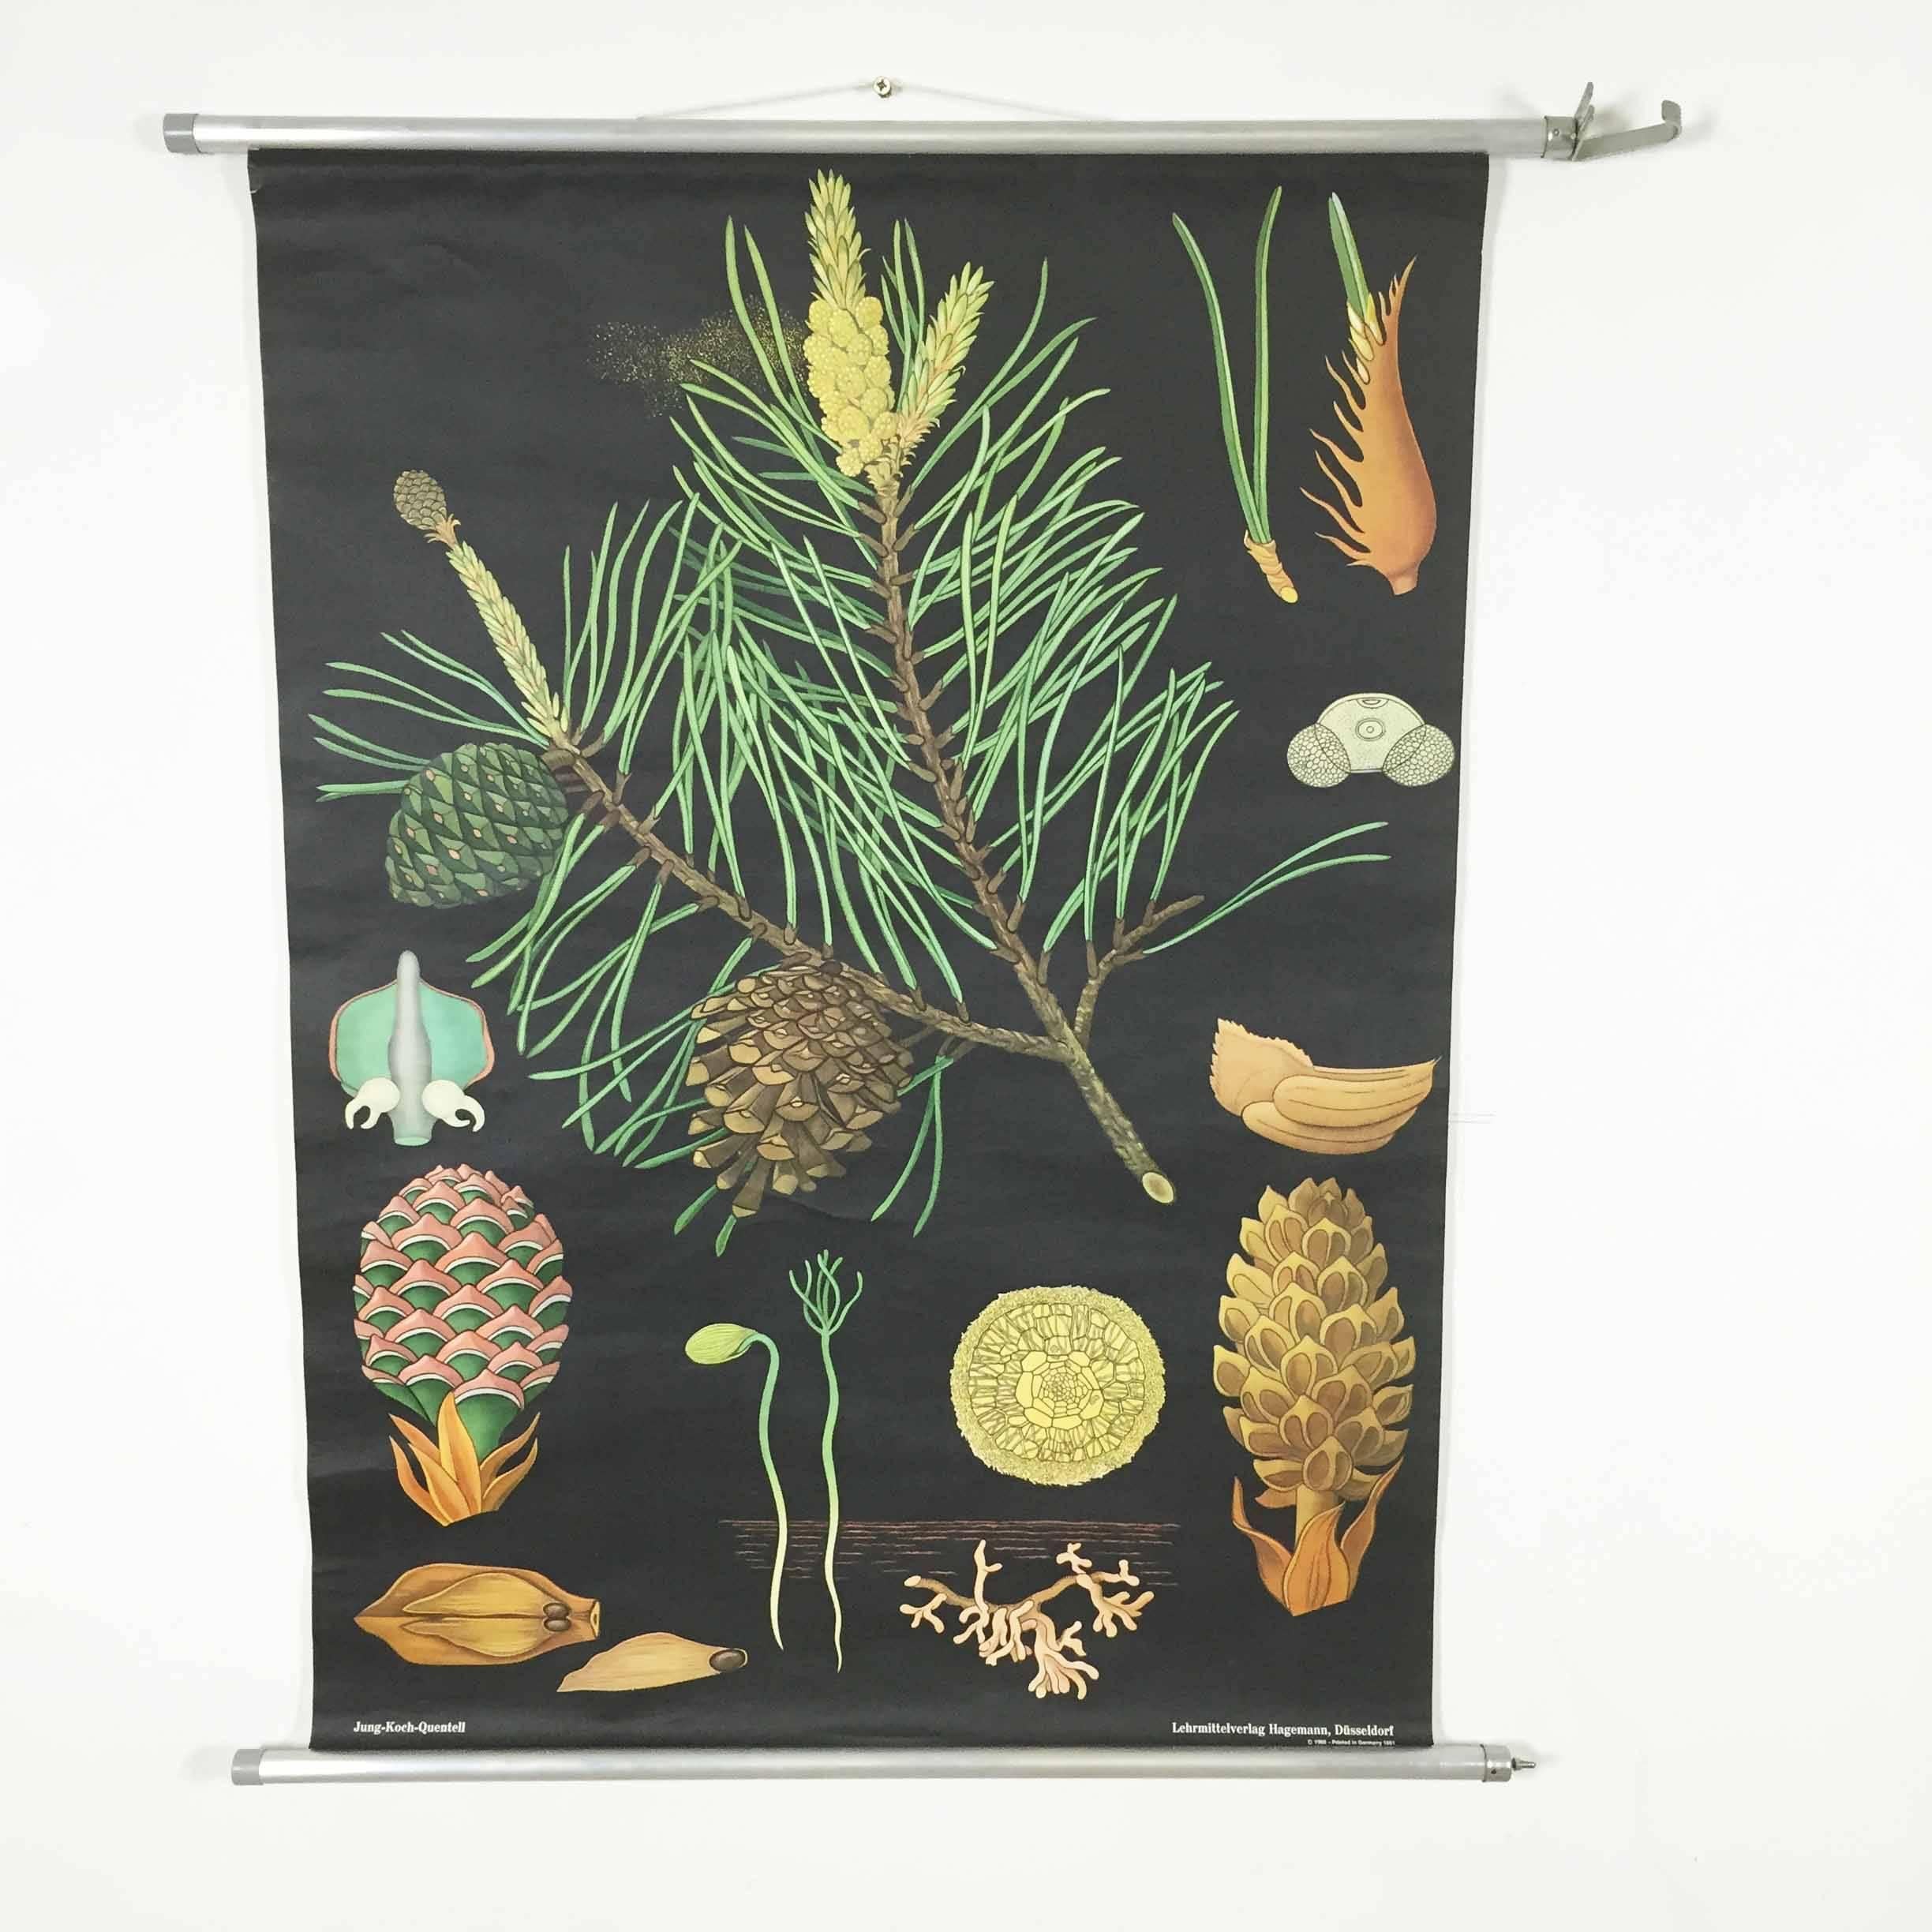 Vintage pull down chart



original vintage school chart, by Jung Koch Quentell

Paperprint on Linen. The canvas is fixed between two aluminium dowels. There is a ribbon for hanging it up the wall. can be rolled up for transportation and